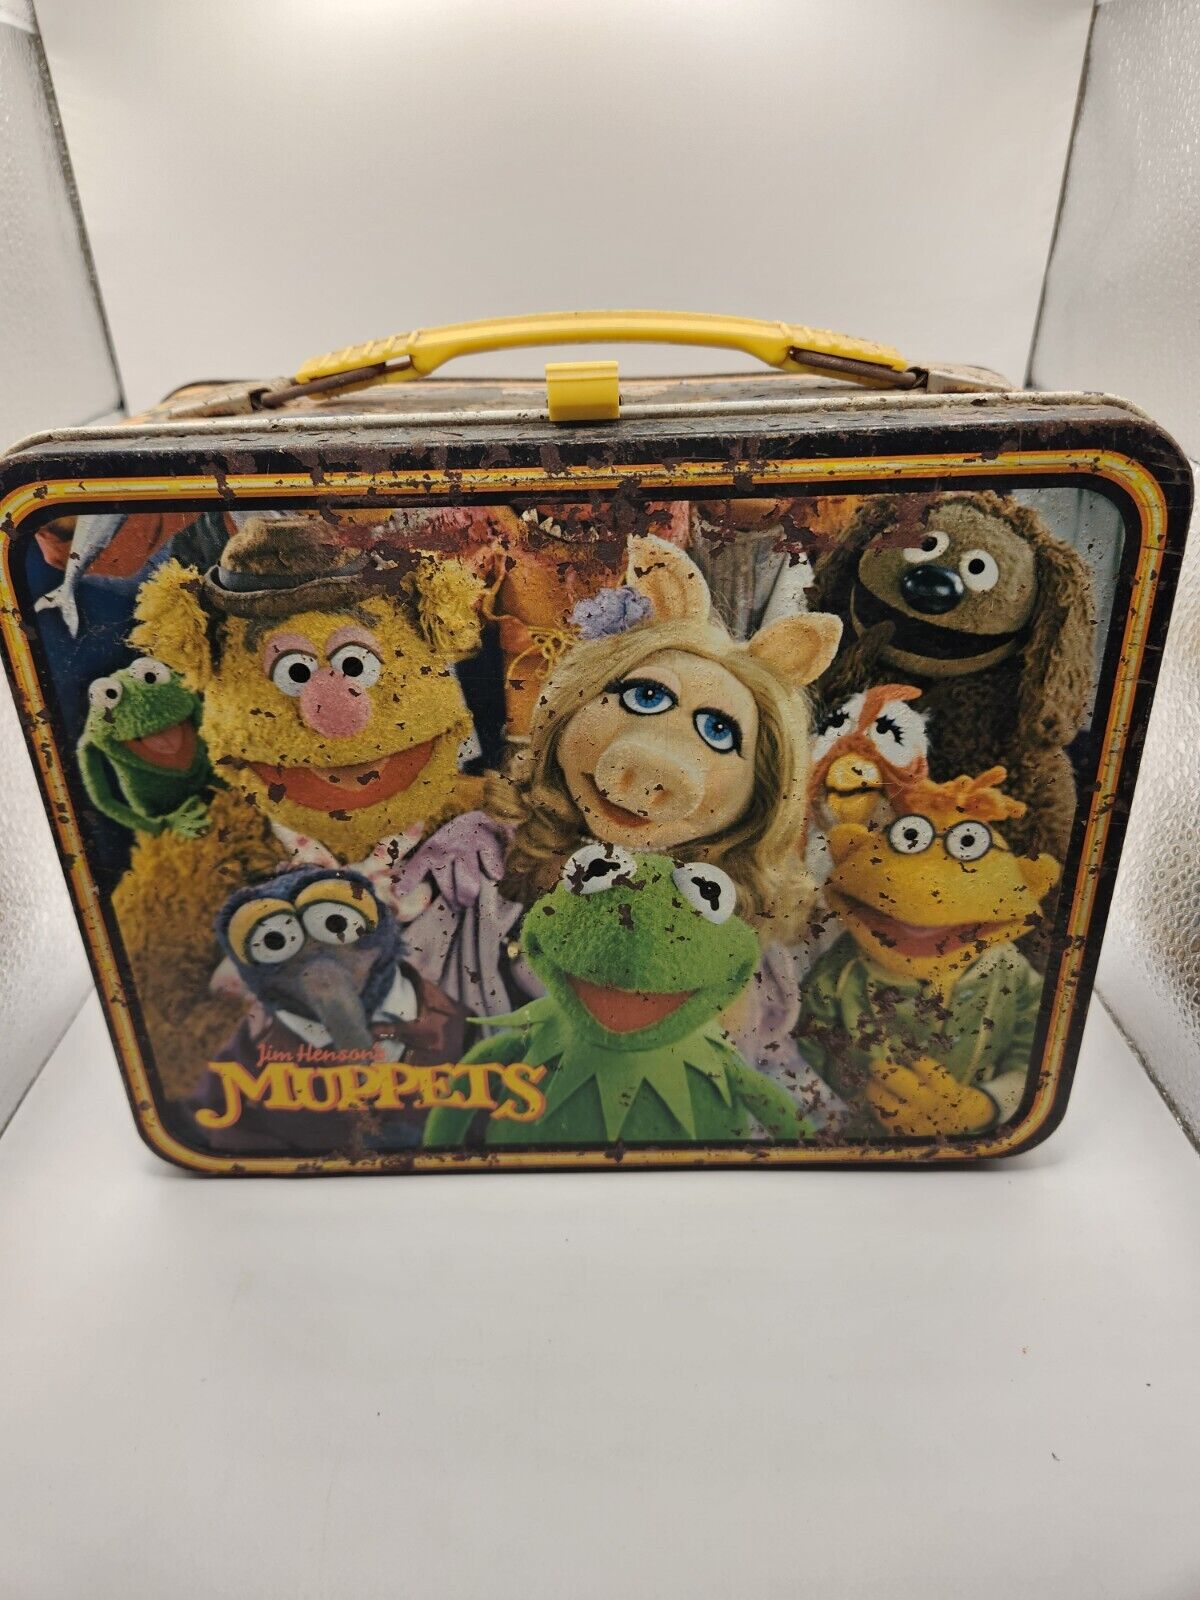 Vintage 1979 Muppets Lunch Box Jim Henson RARE - FOZZIE on back - No Thermos